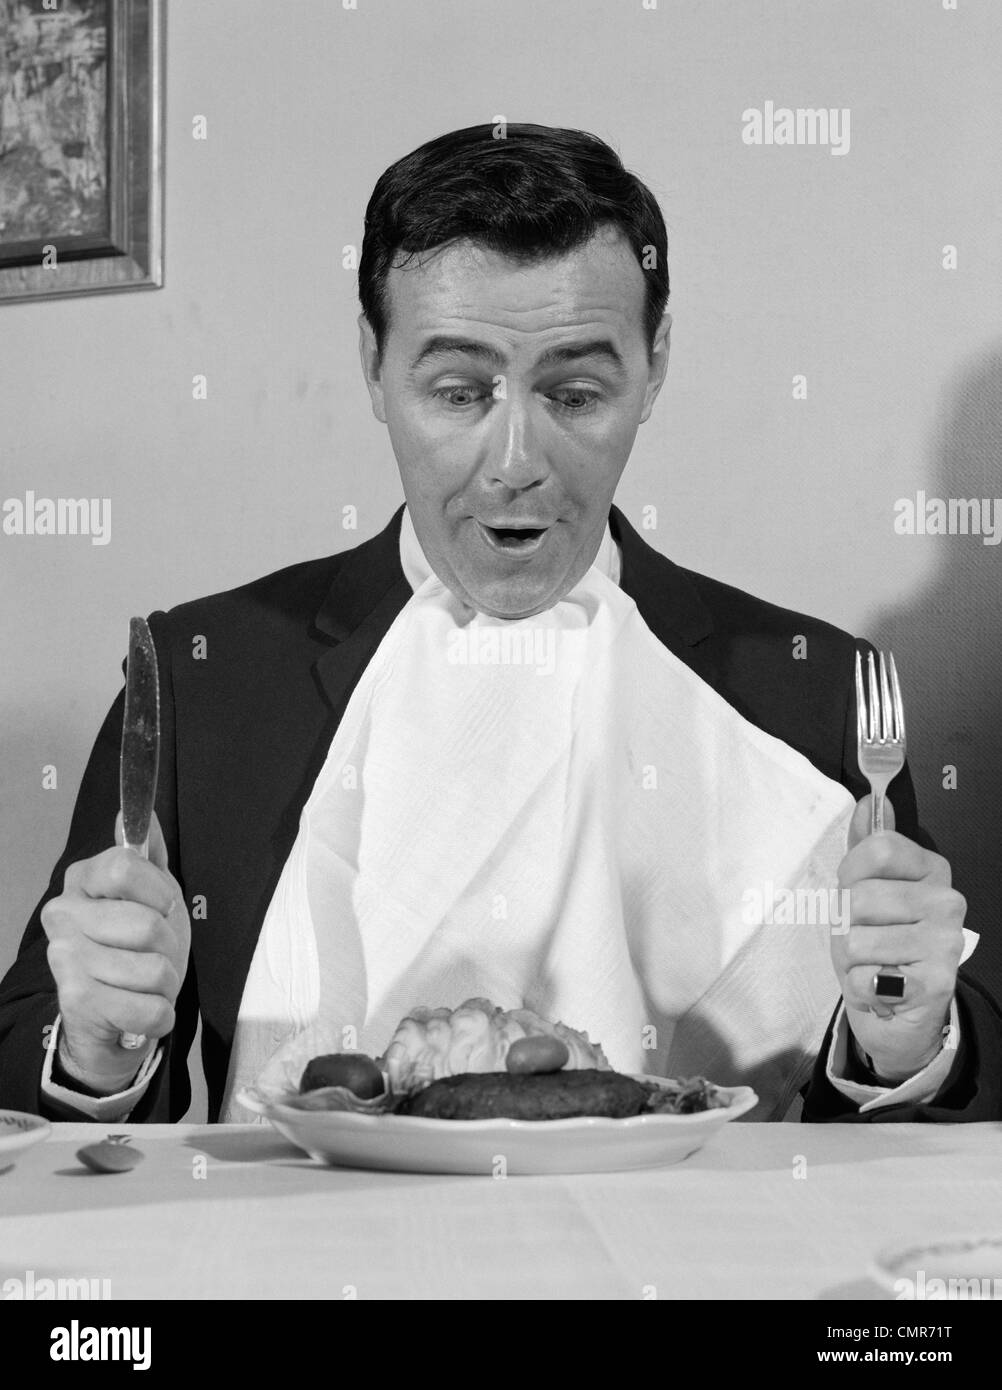 1960s MAN SITTING AT TABLE READY TO EAT DINNER WITH NAPKIN AT NECK AND KNIFE & FORK IN AIR Stock Photo